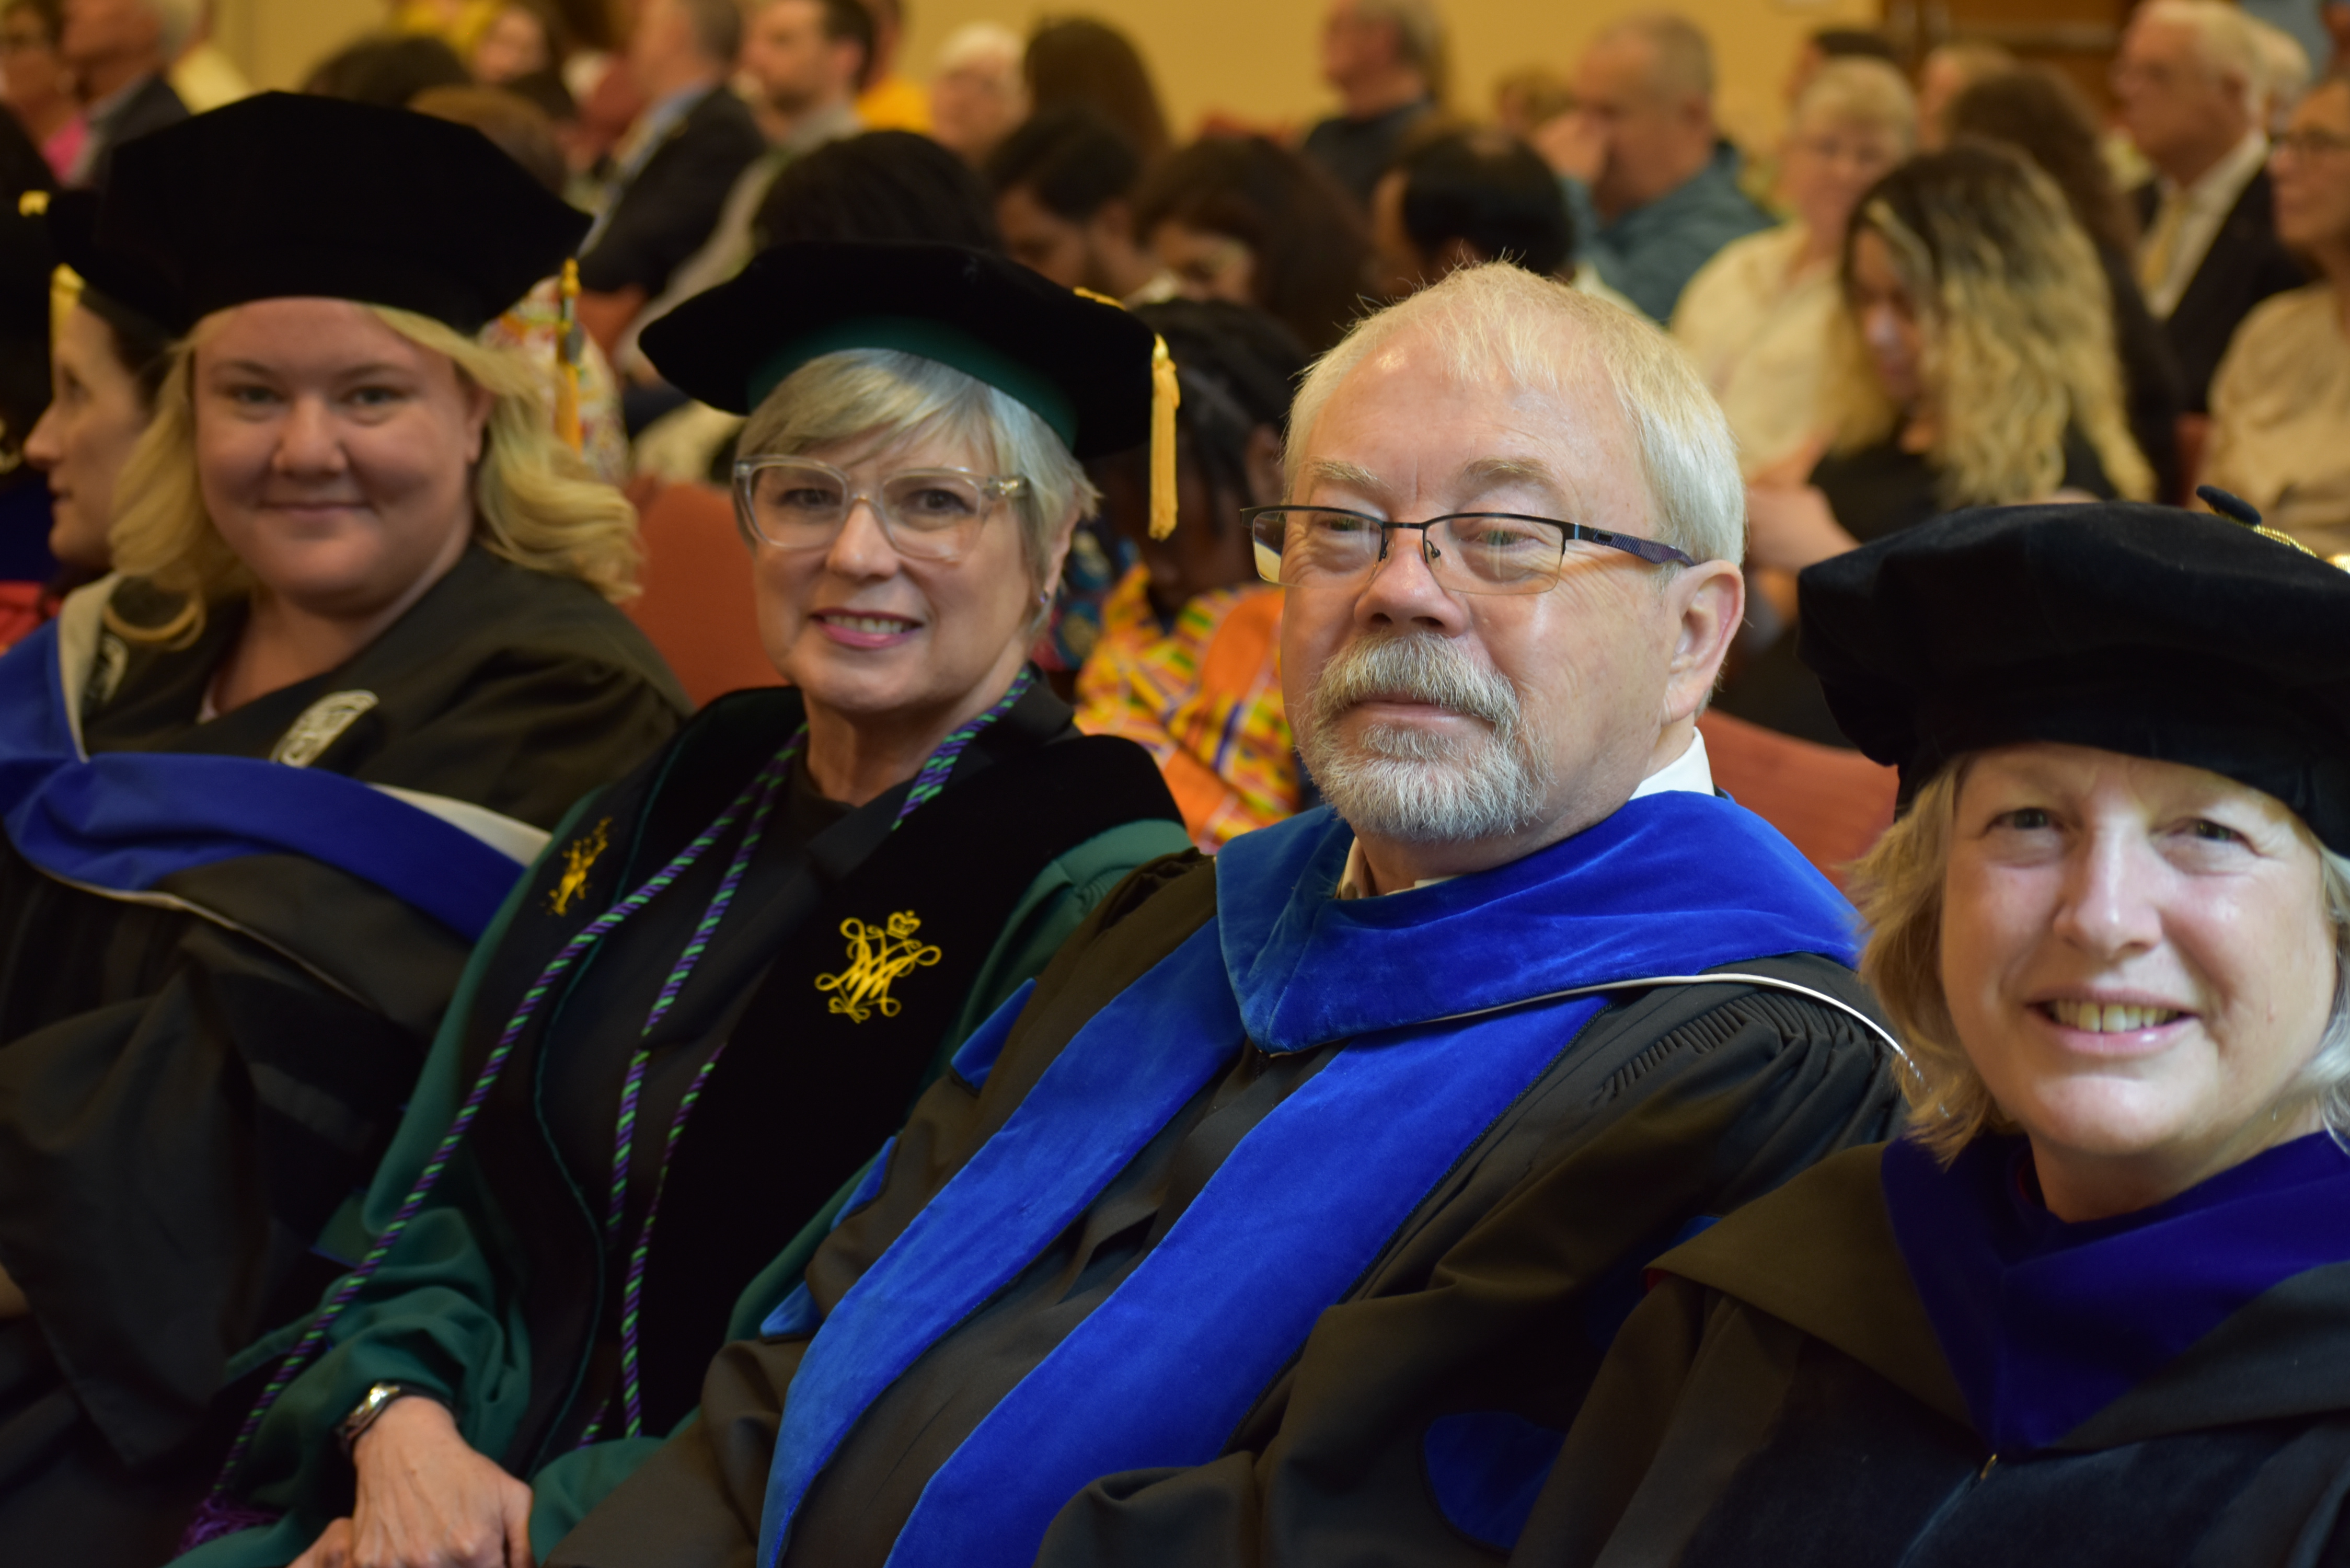 Faculty Gather for Cording Ceremony